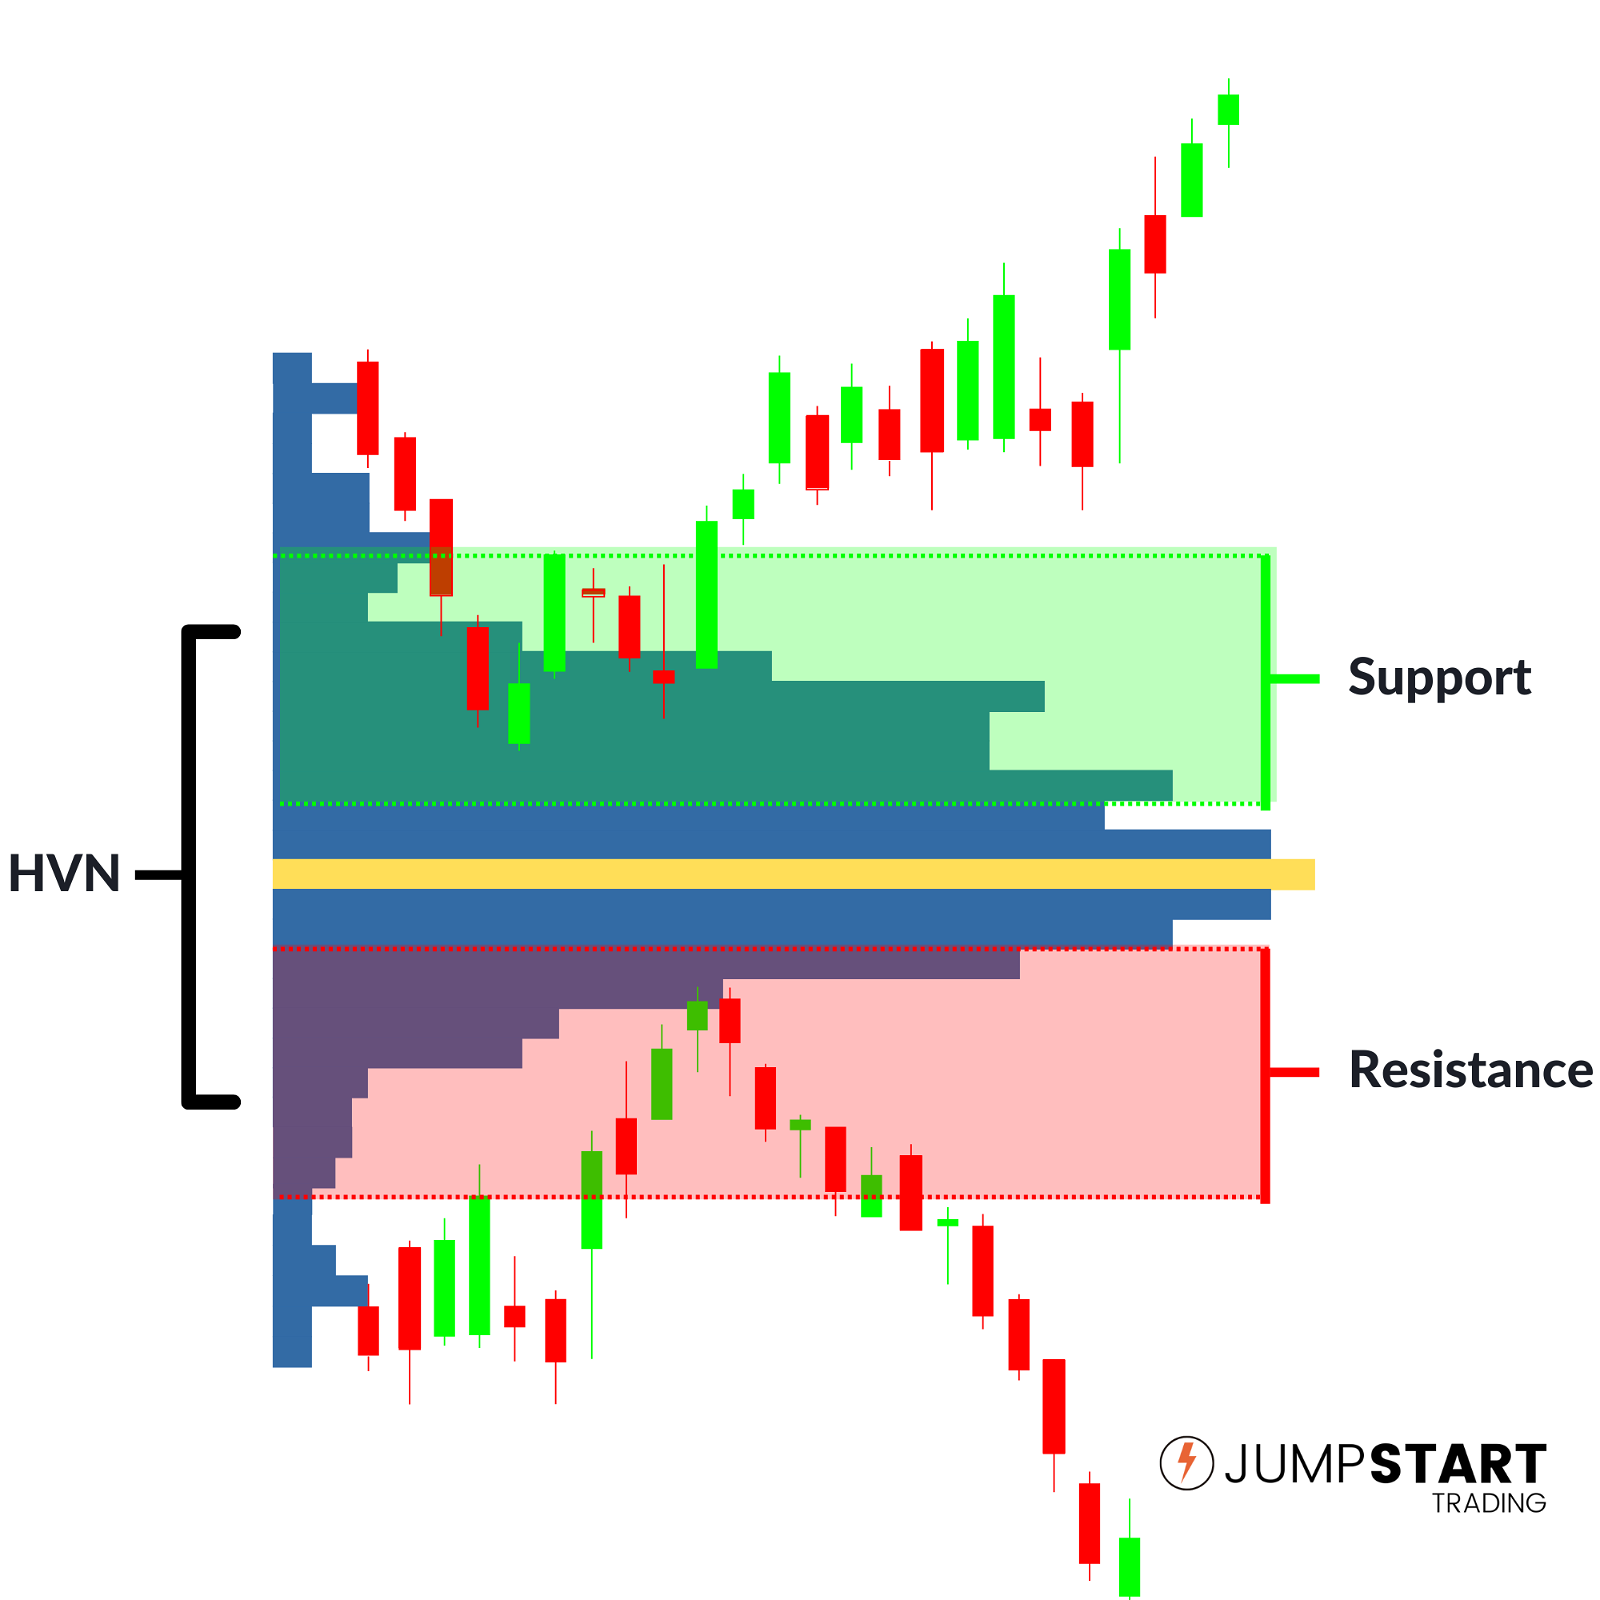 Example of High Volume Node Acting as Support and Resistance